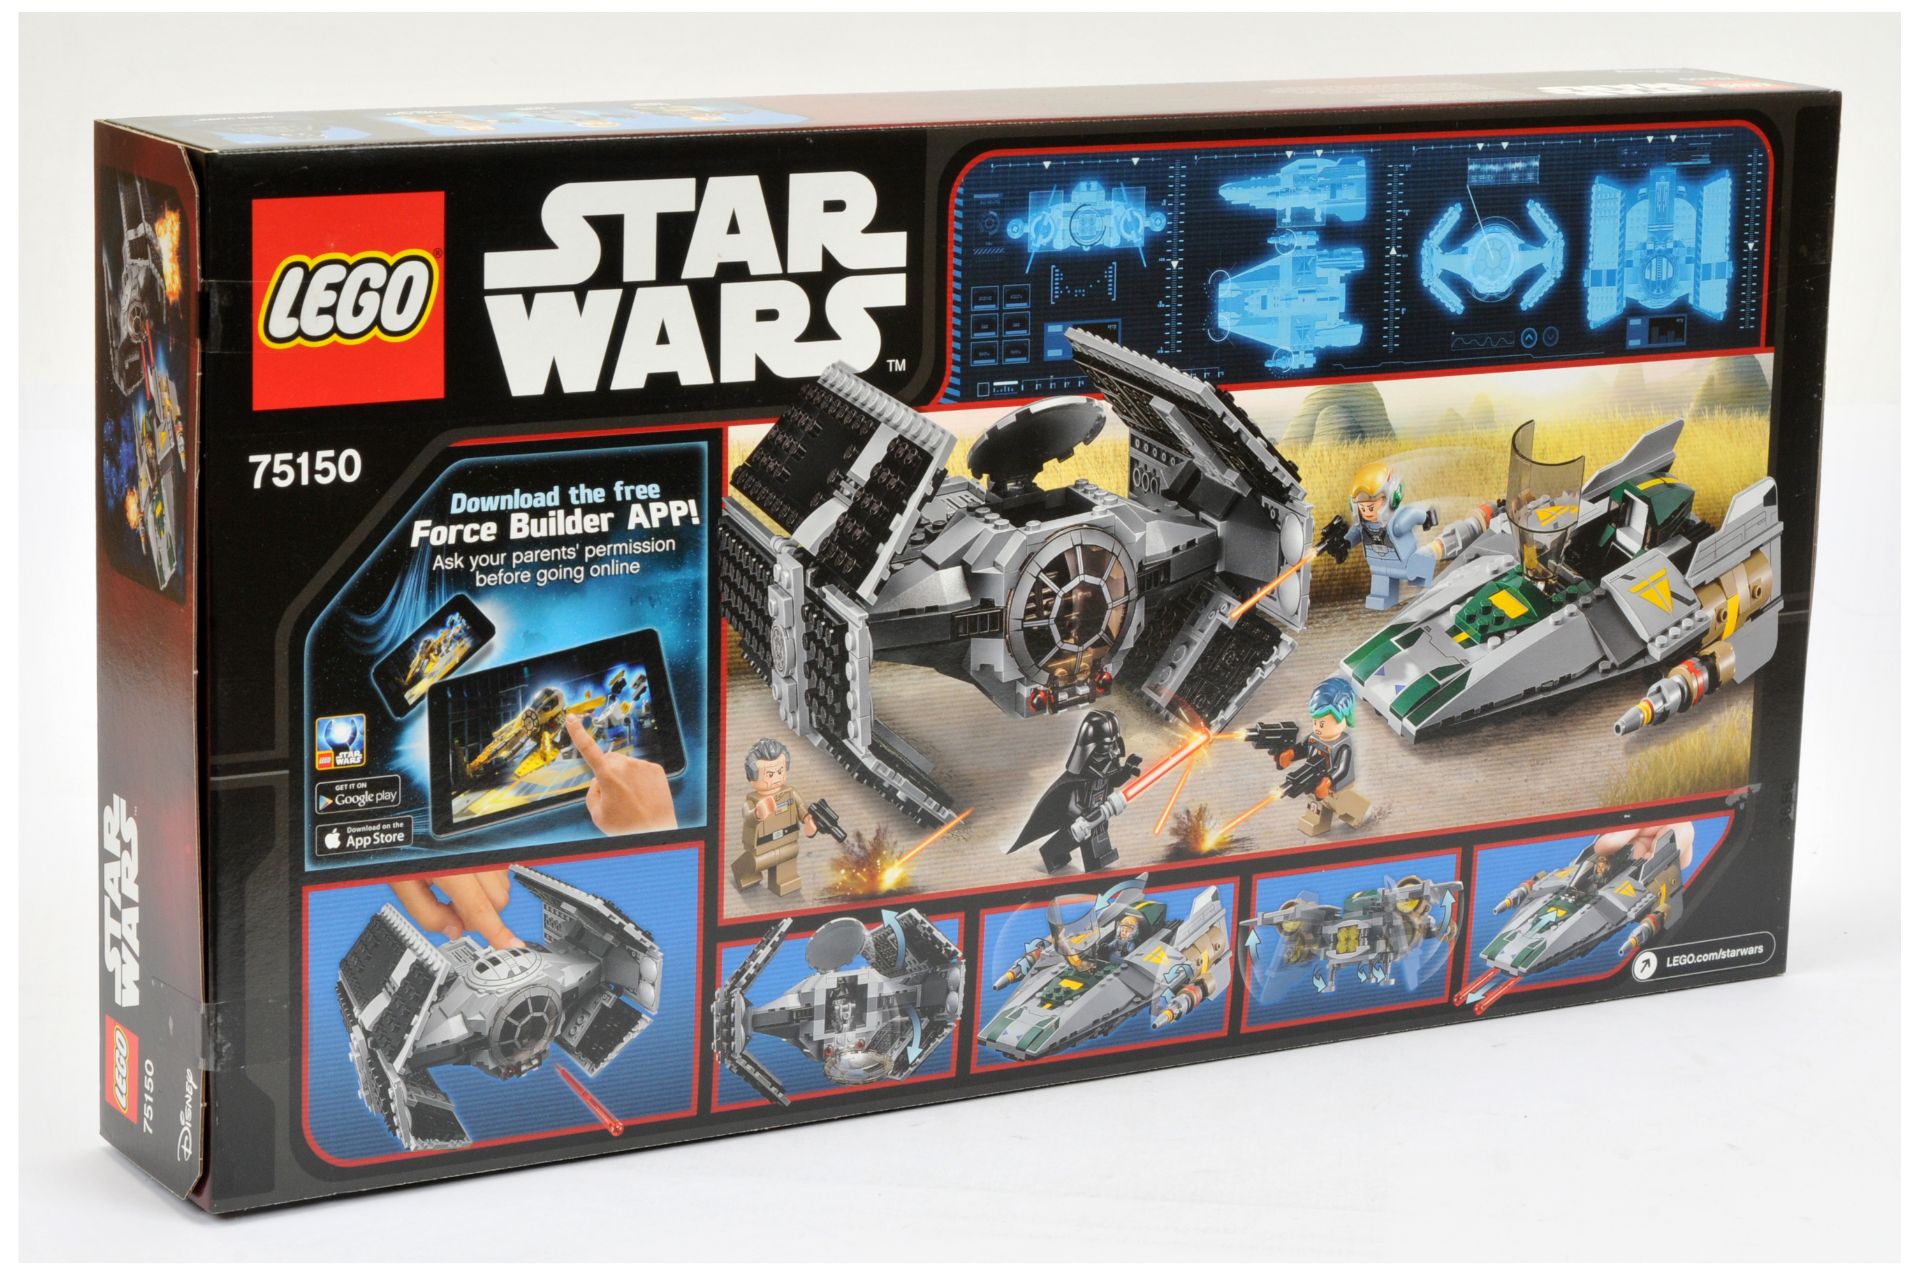 Lego Star Wars Rebels Vader's TIE Advanced vs. A-Wing Starfighter - Image 2 of 2